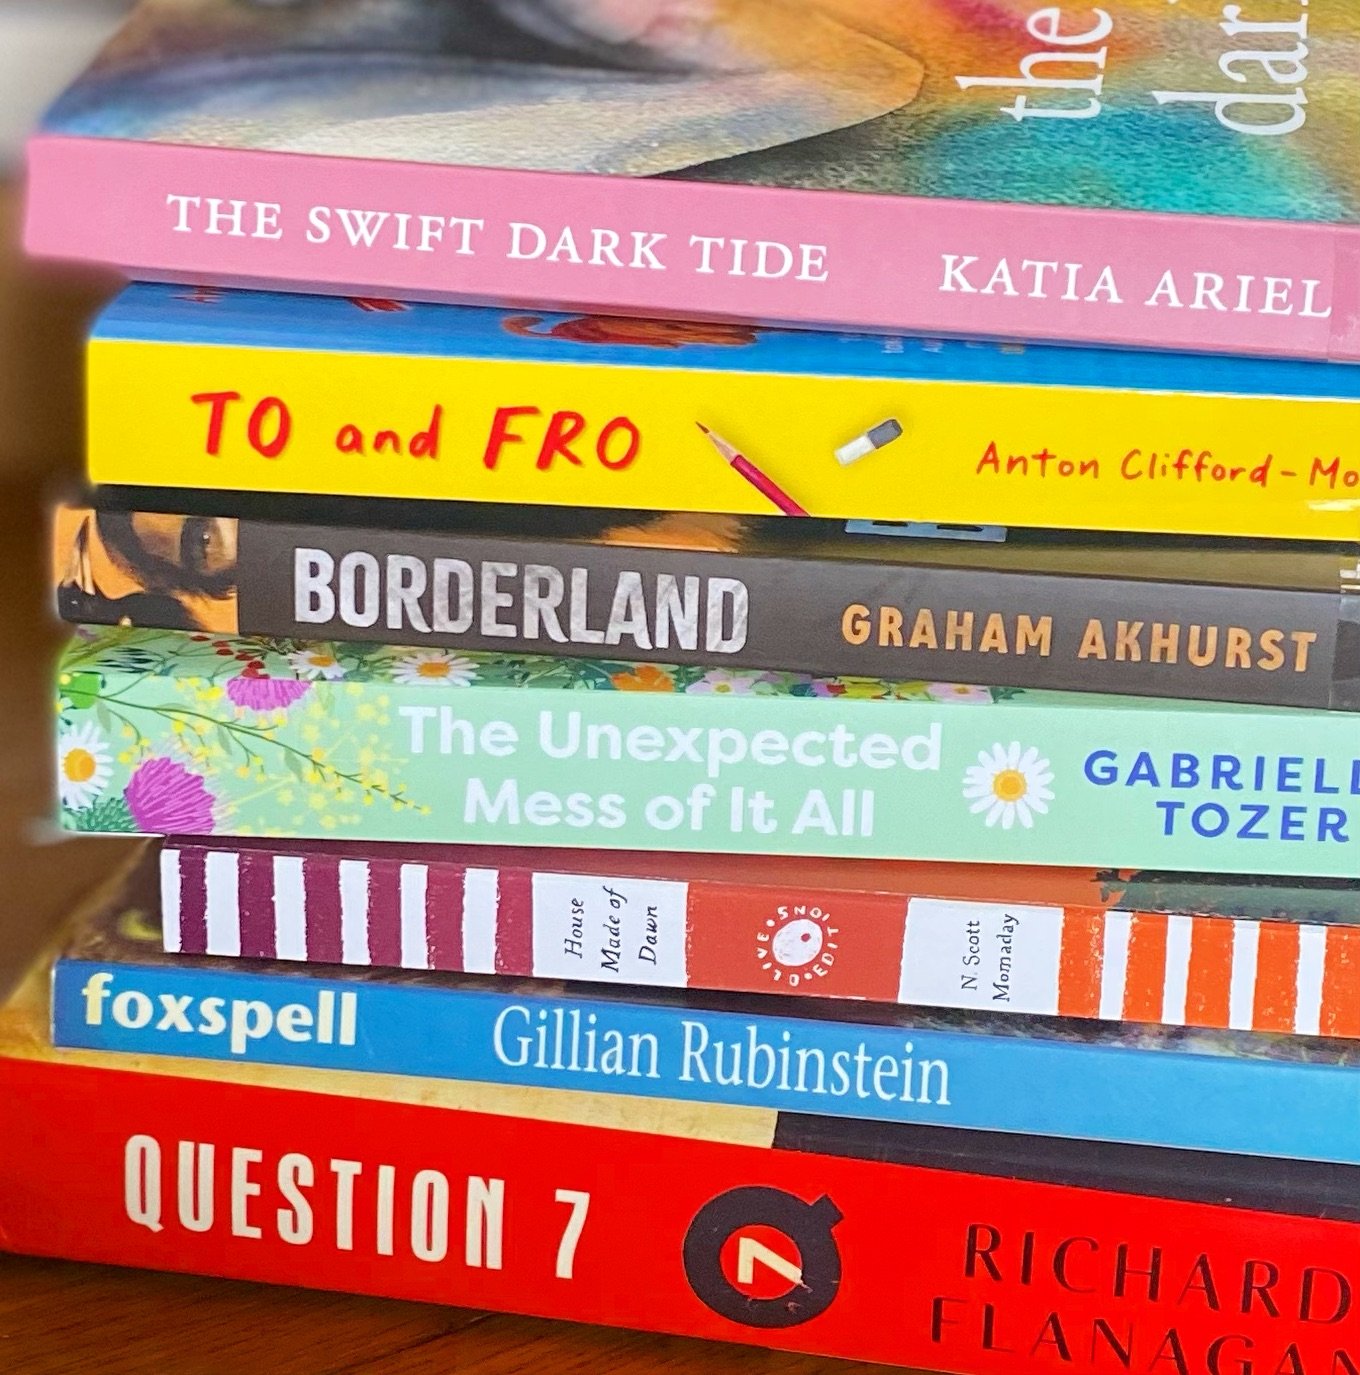 All these books found their way to me this week and I have a wonderful feeling of riches. 

Feeling rich in books is a very particular kind of joy. All those words, all those stories, on my bedside table, patiently waiting for me. Heaven. 

And - in 